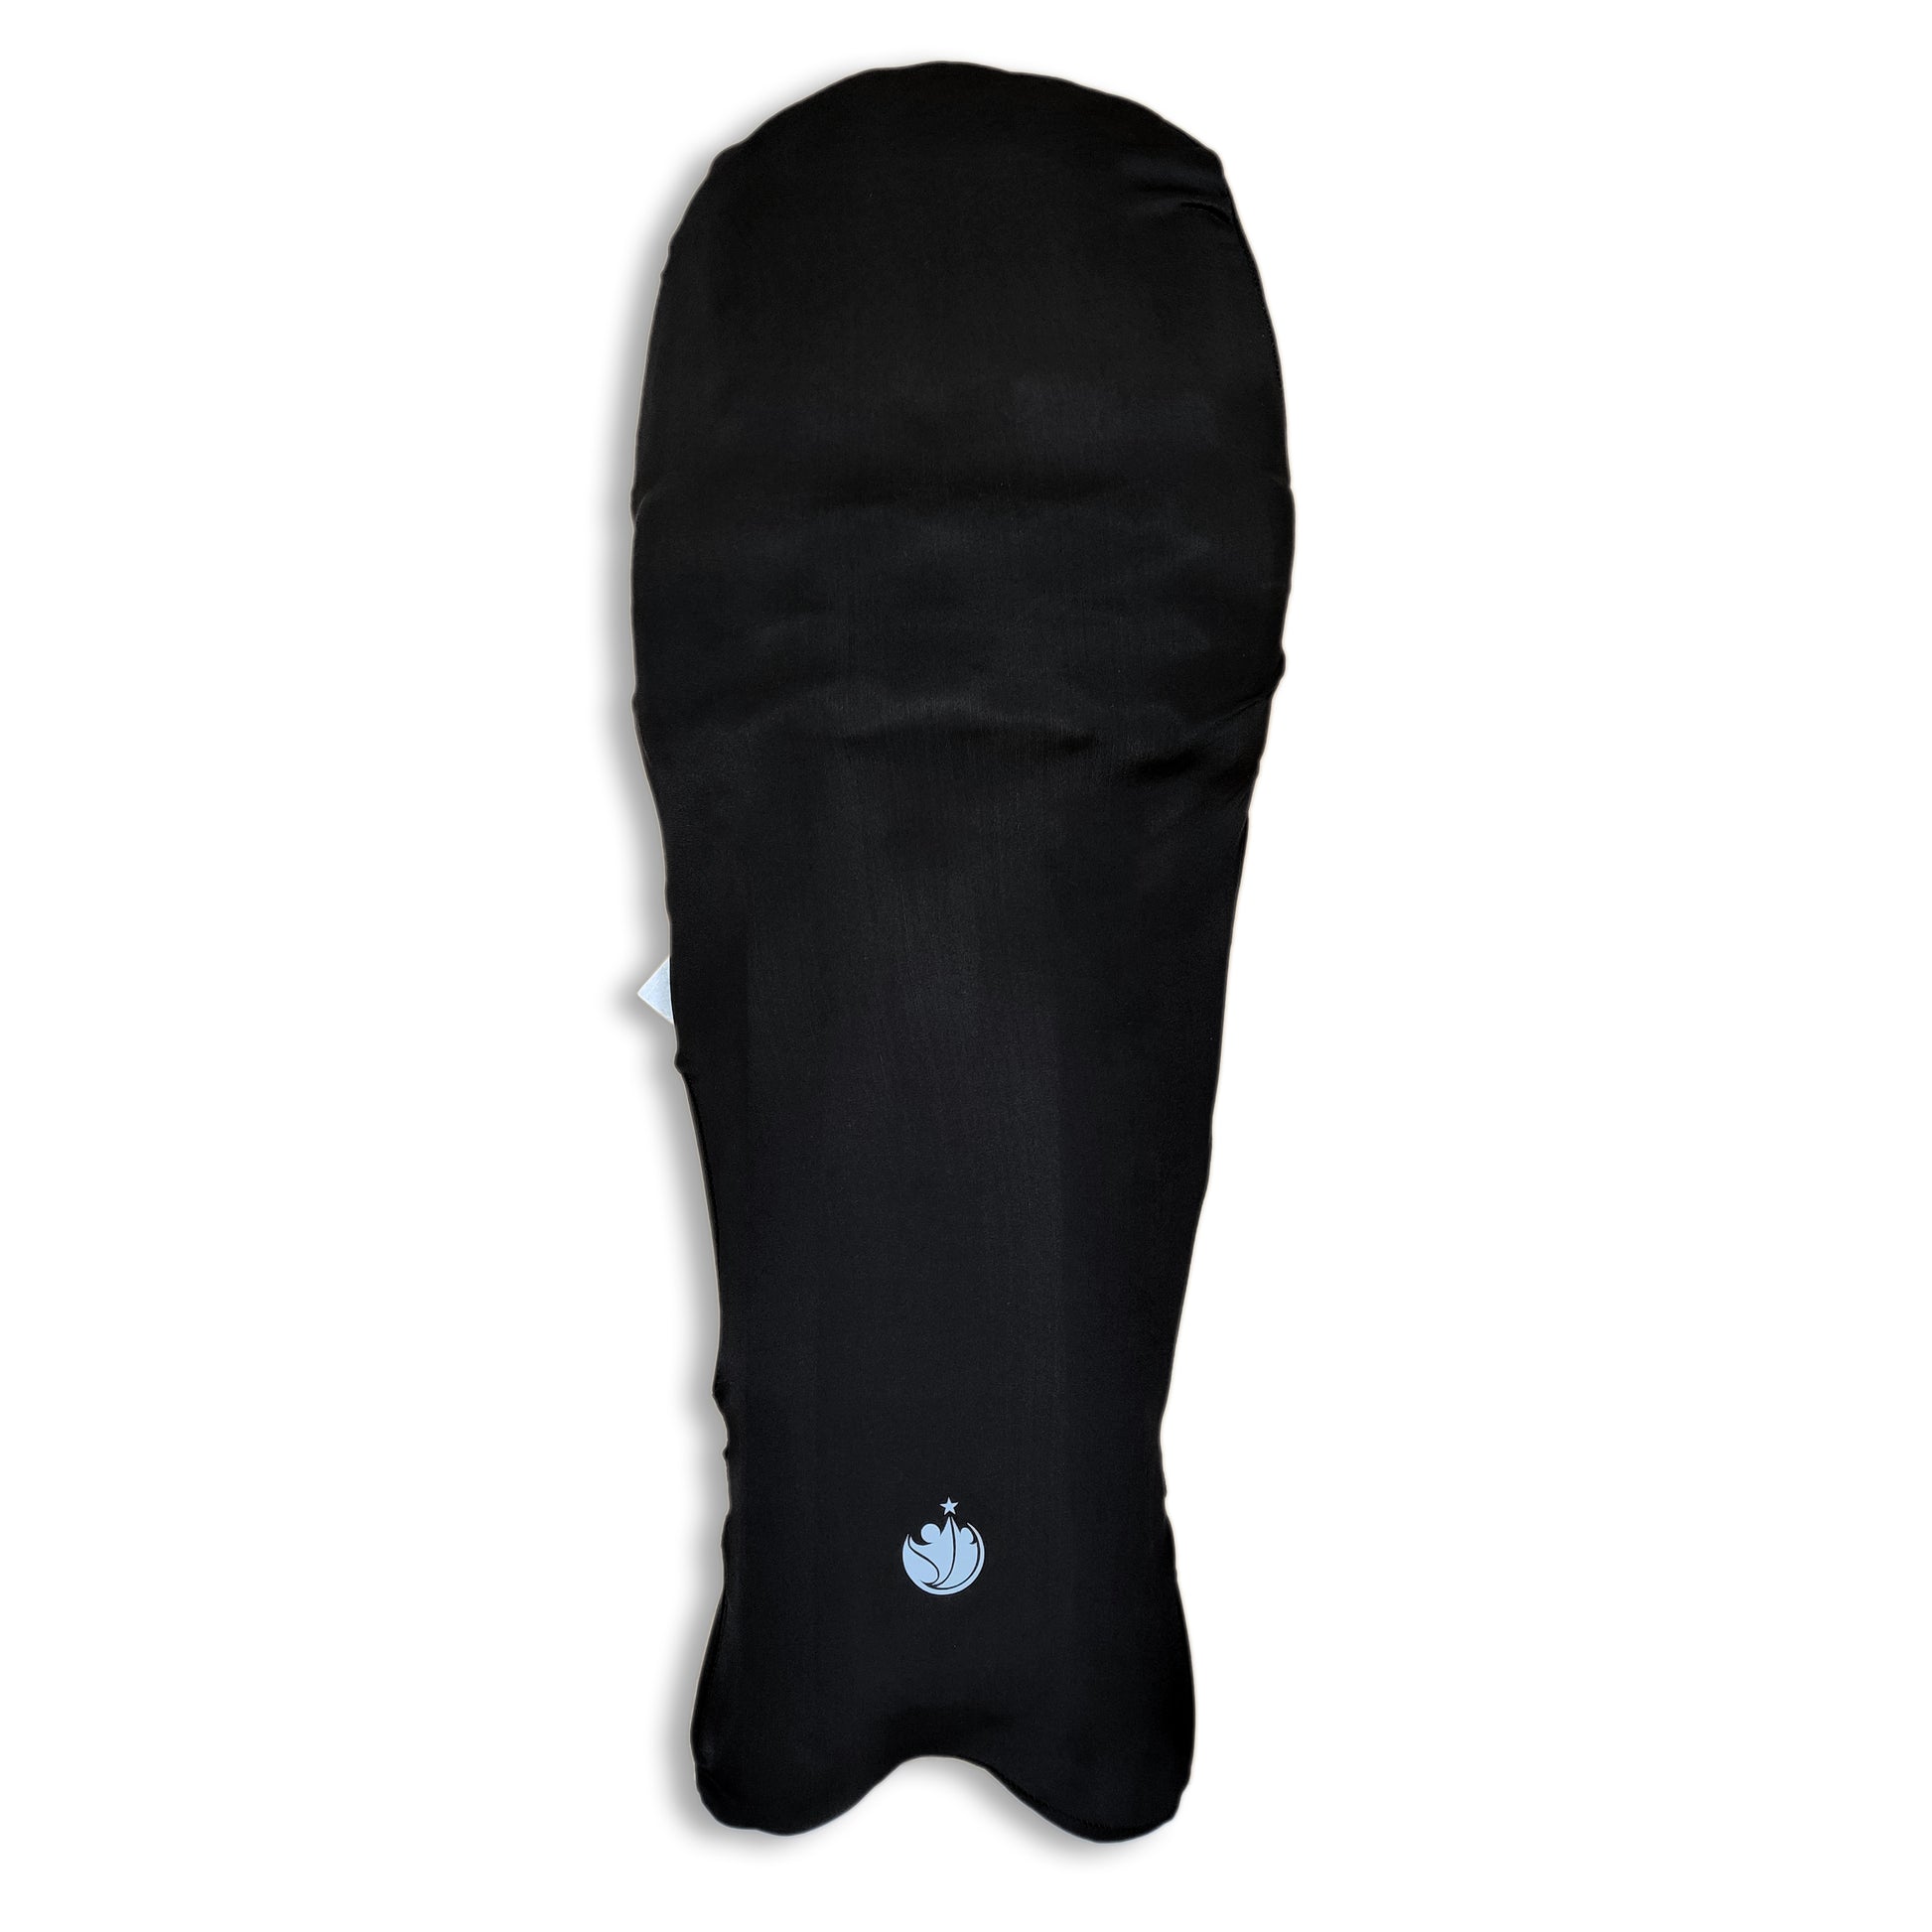 Prokick Cricket Pad/Legguard Stretchable Outer Skin Cover, Free Size - Easy to Fit (1 Pair) - Best Price online Prokicksports.com